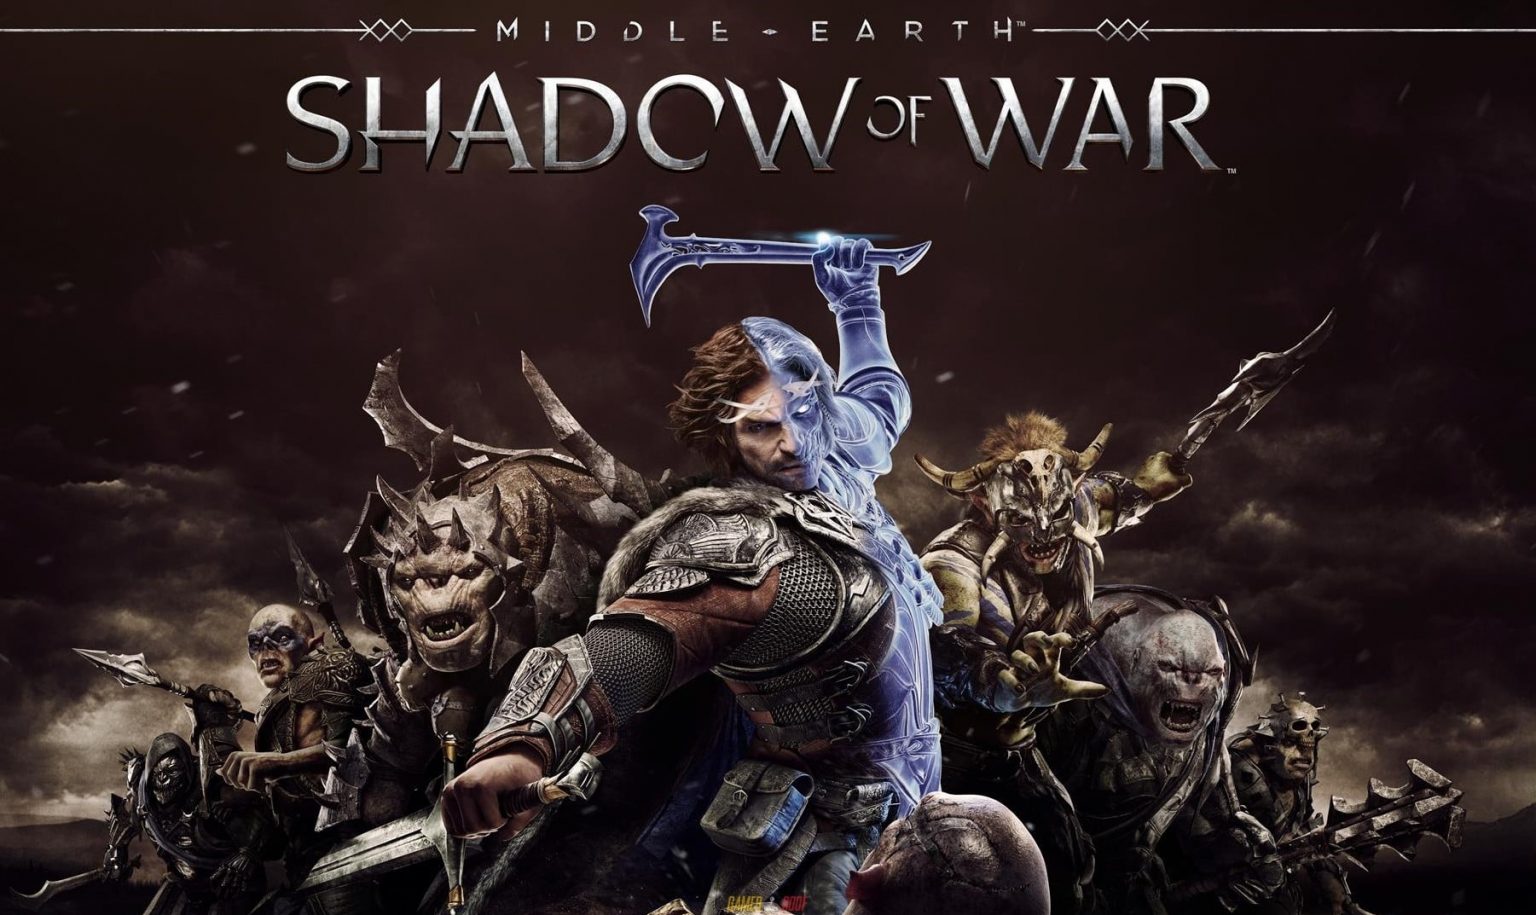 Middle earth Shadow of War Nintendo Switch iOS/APK Full Version Free Download